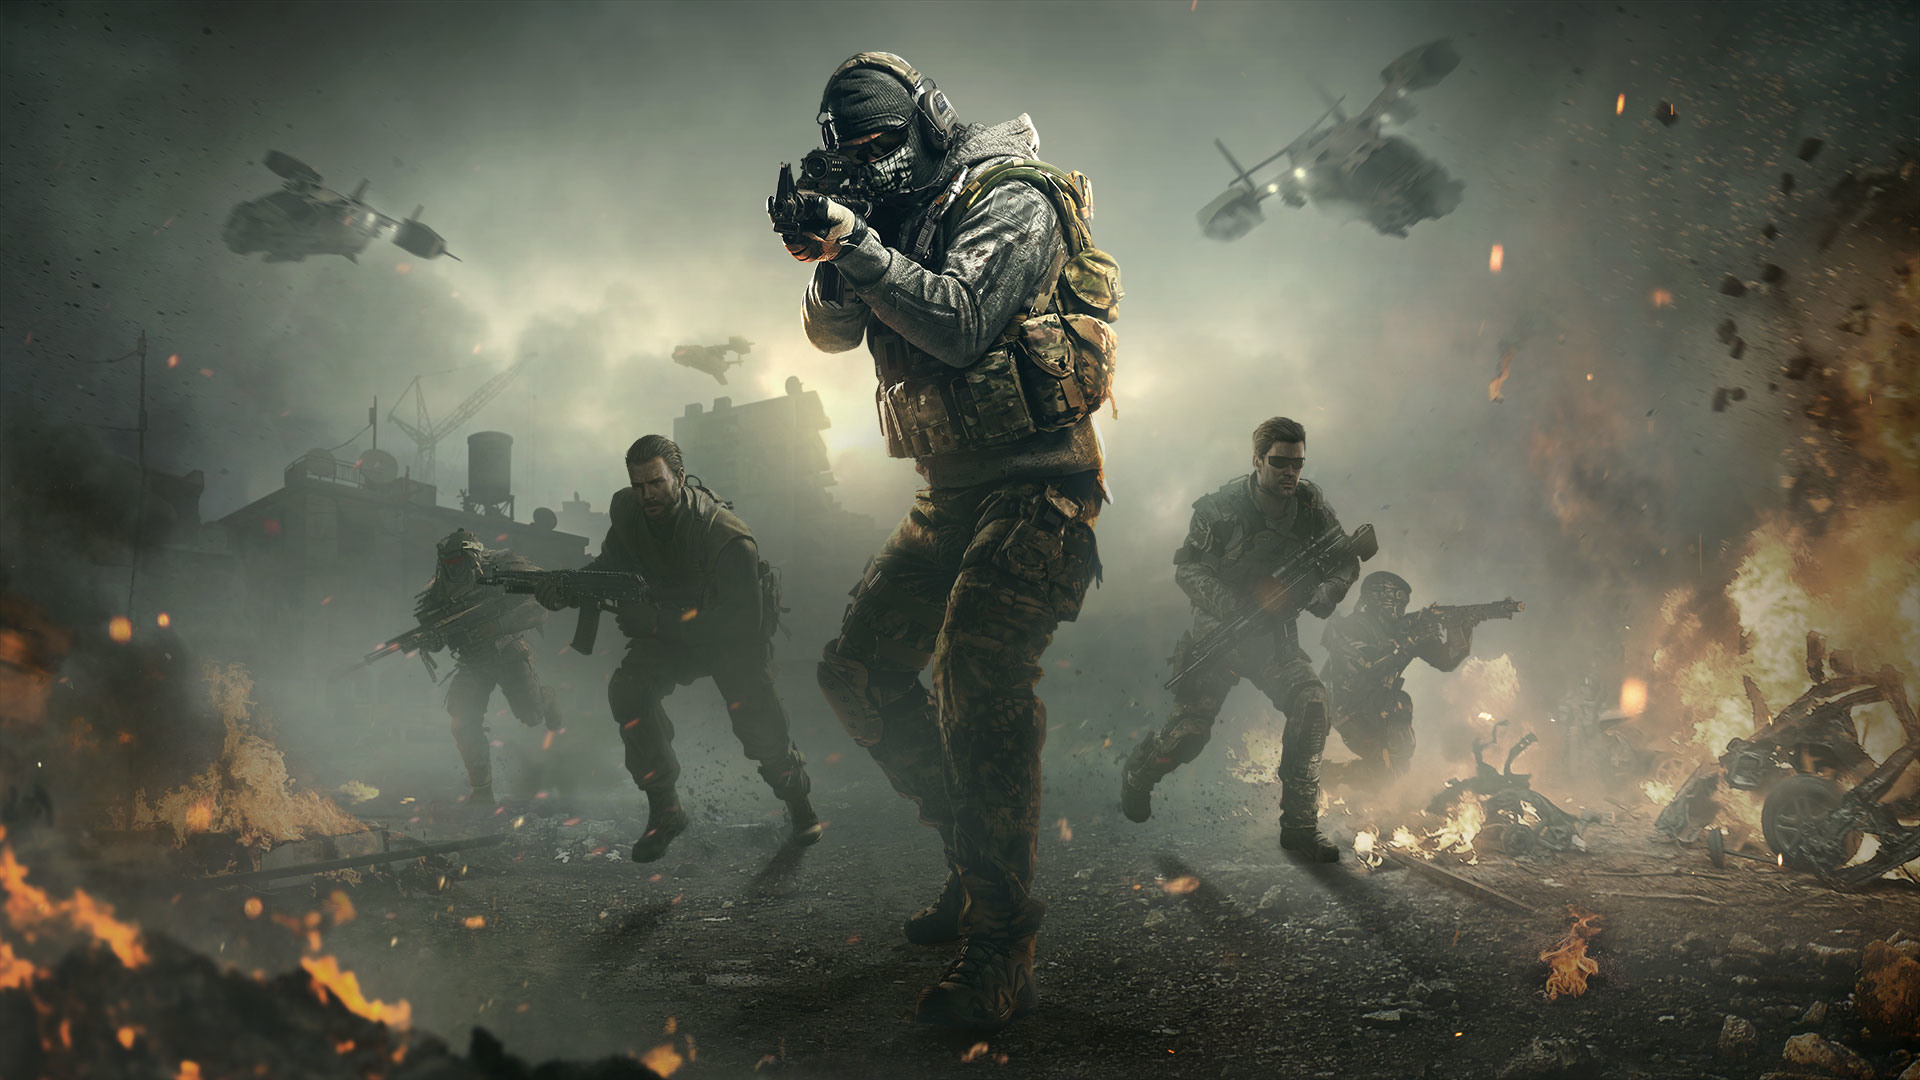 Call of duty mobile 11. sezon, call of duty mobile yeni sezon, call of duty mobile güncellemesi